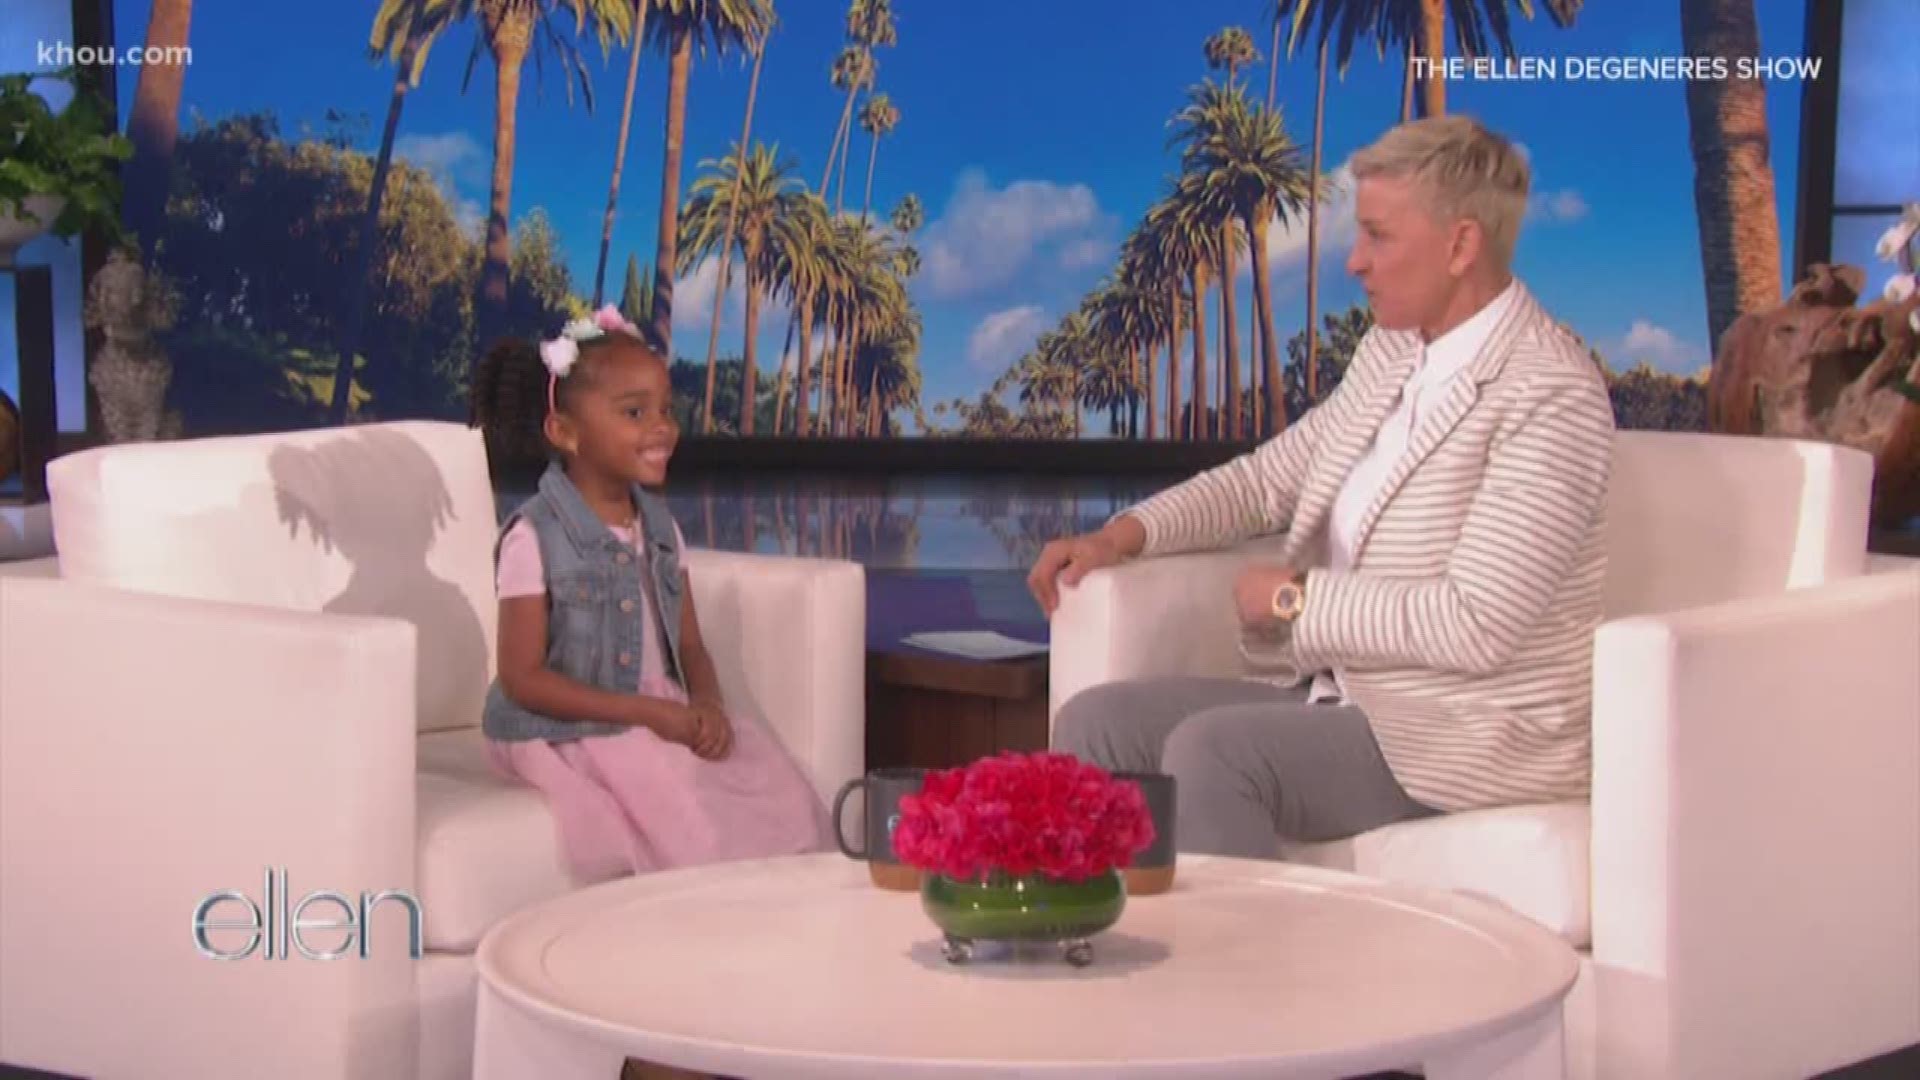 A \Pearland girl appeared on The Ellen DeGeneres Show Wednesday after a video of her talking about how a classmate stole her perfect attendance pencil went viral.